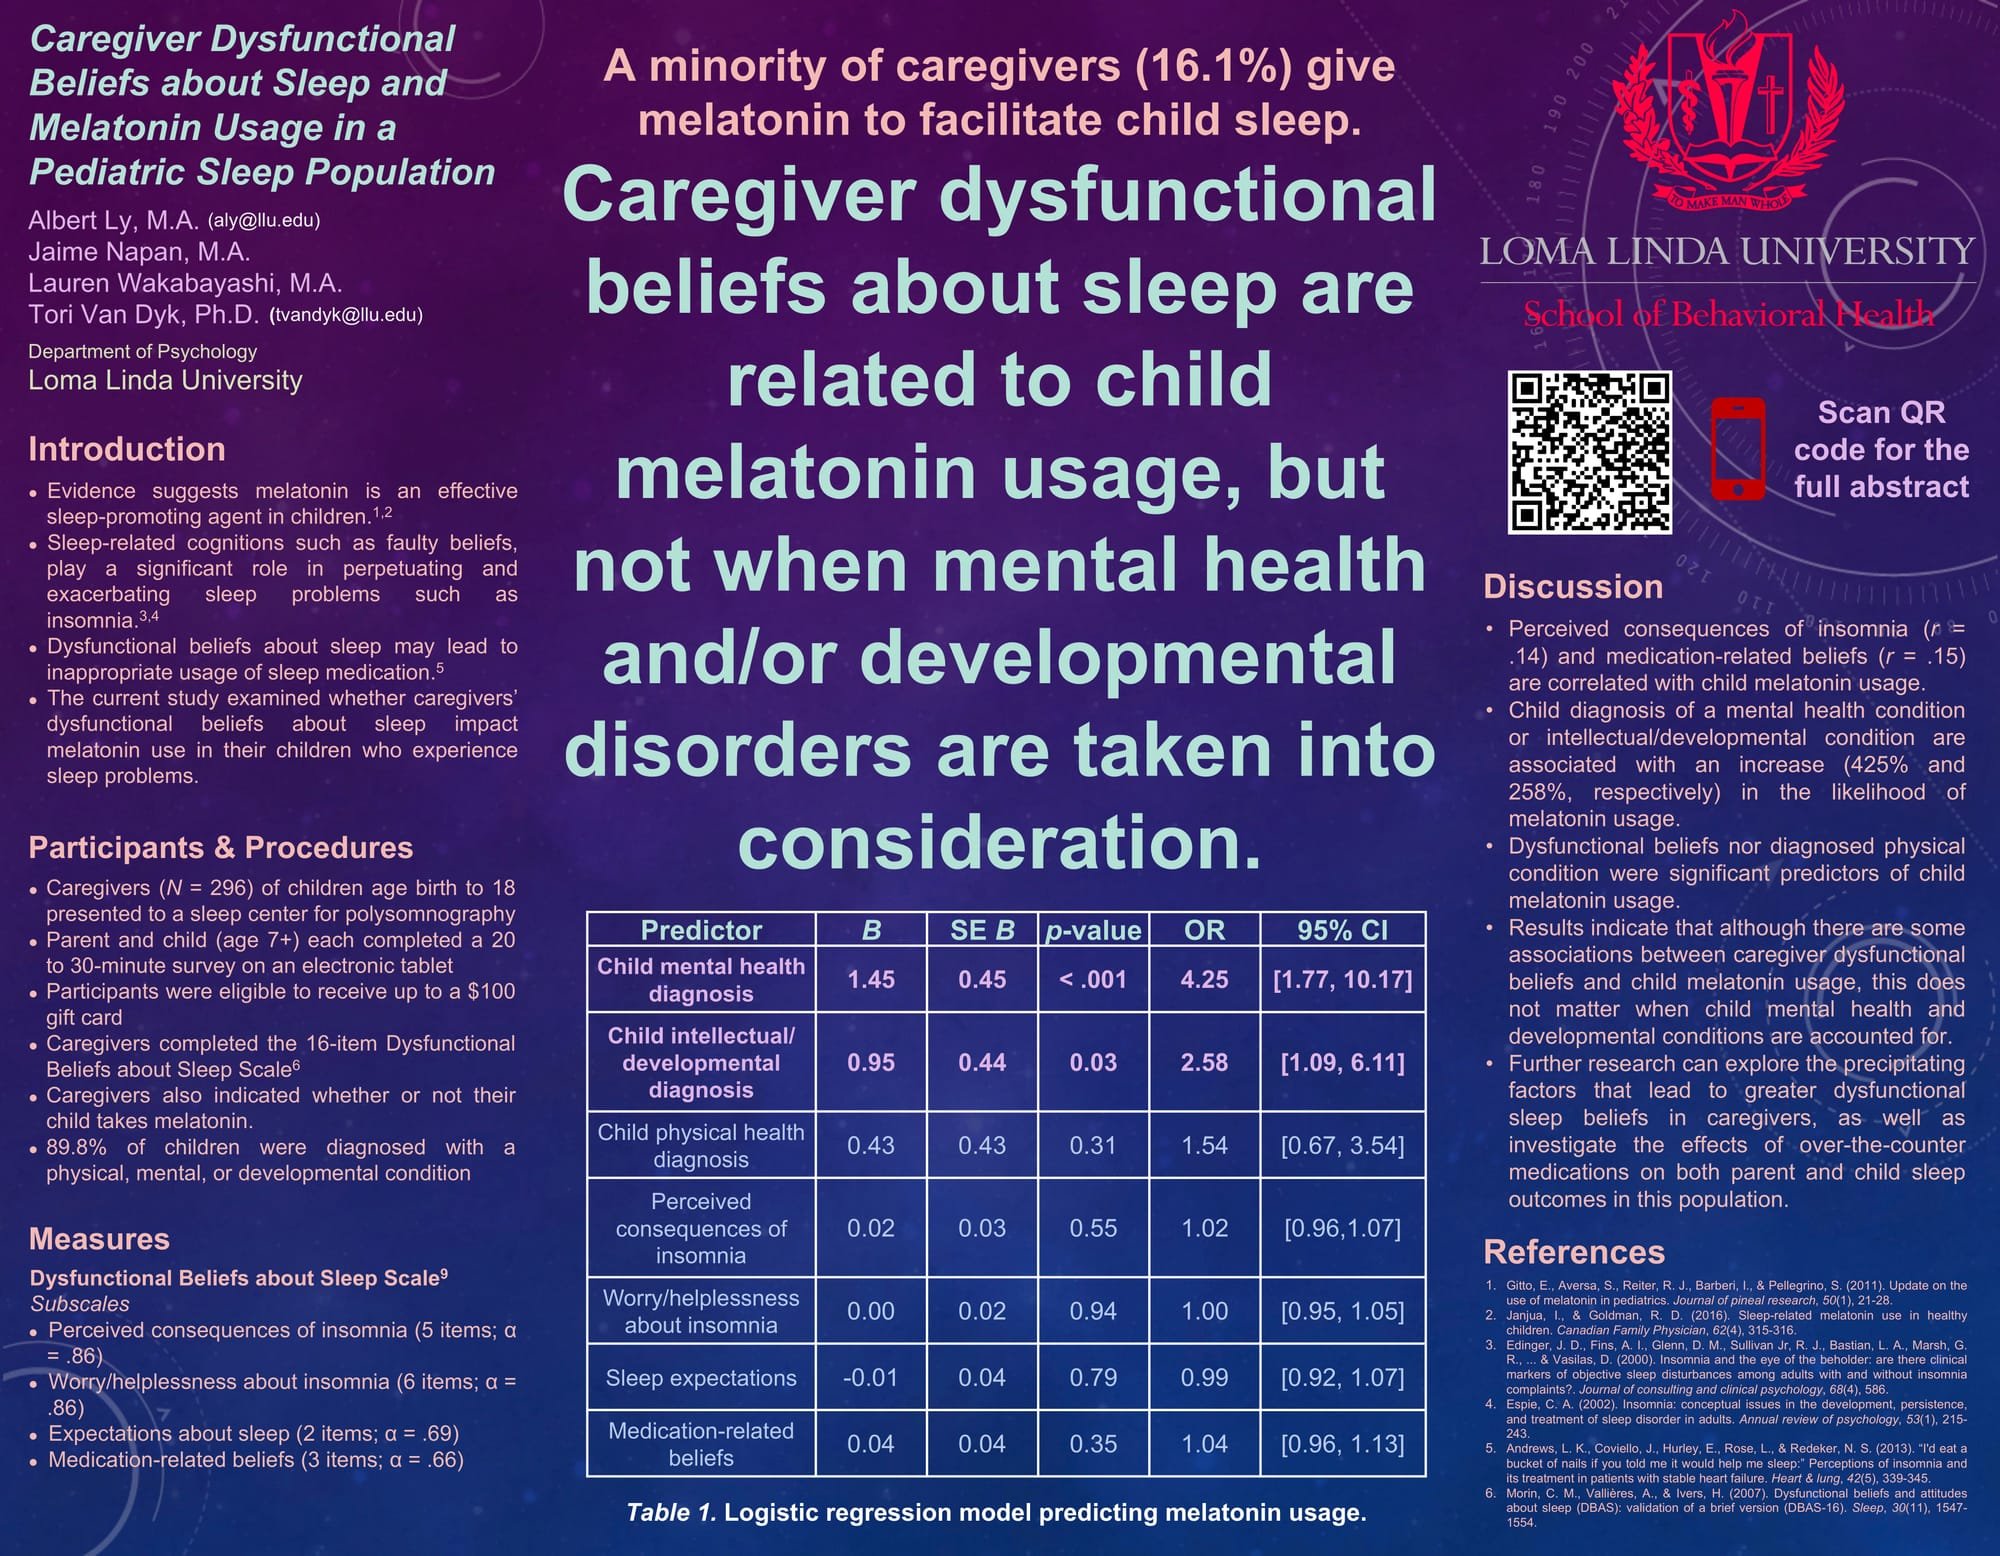 Caregiver Dysfunctional Beliefs about Sleep and Melatonin Usage in a Pediatric Sleep Population